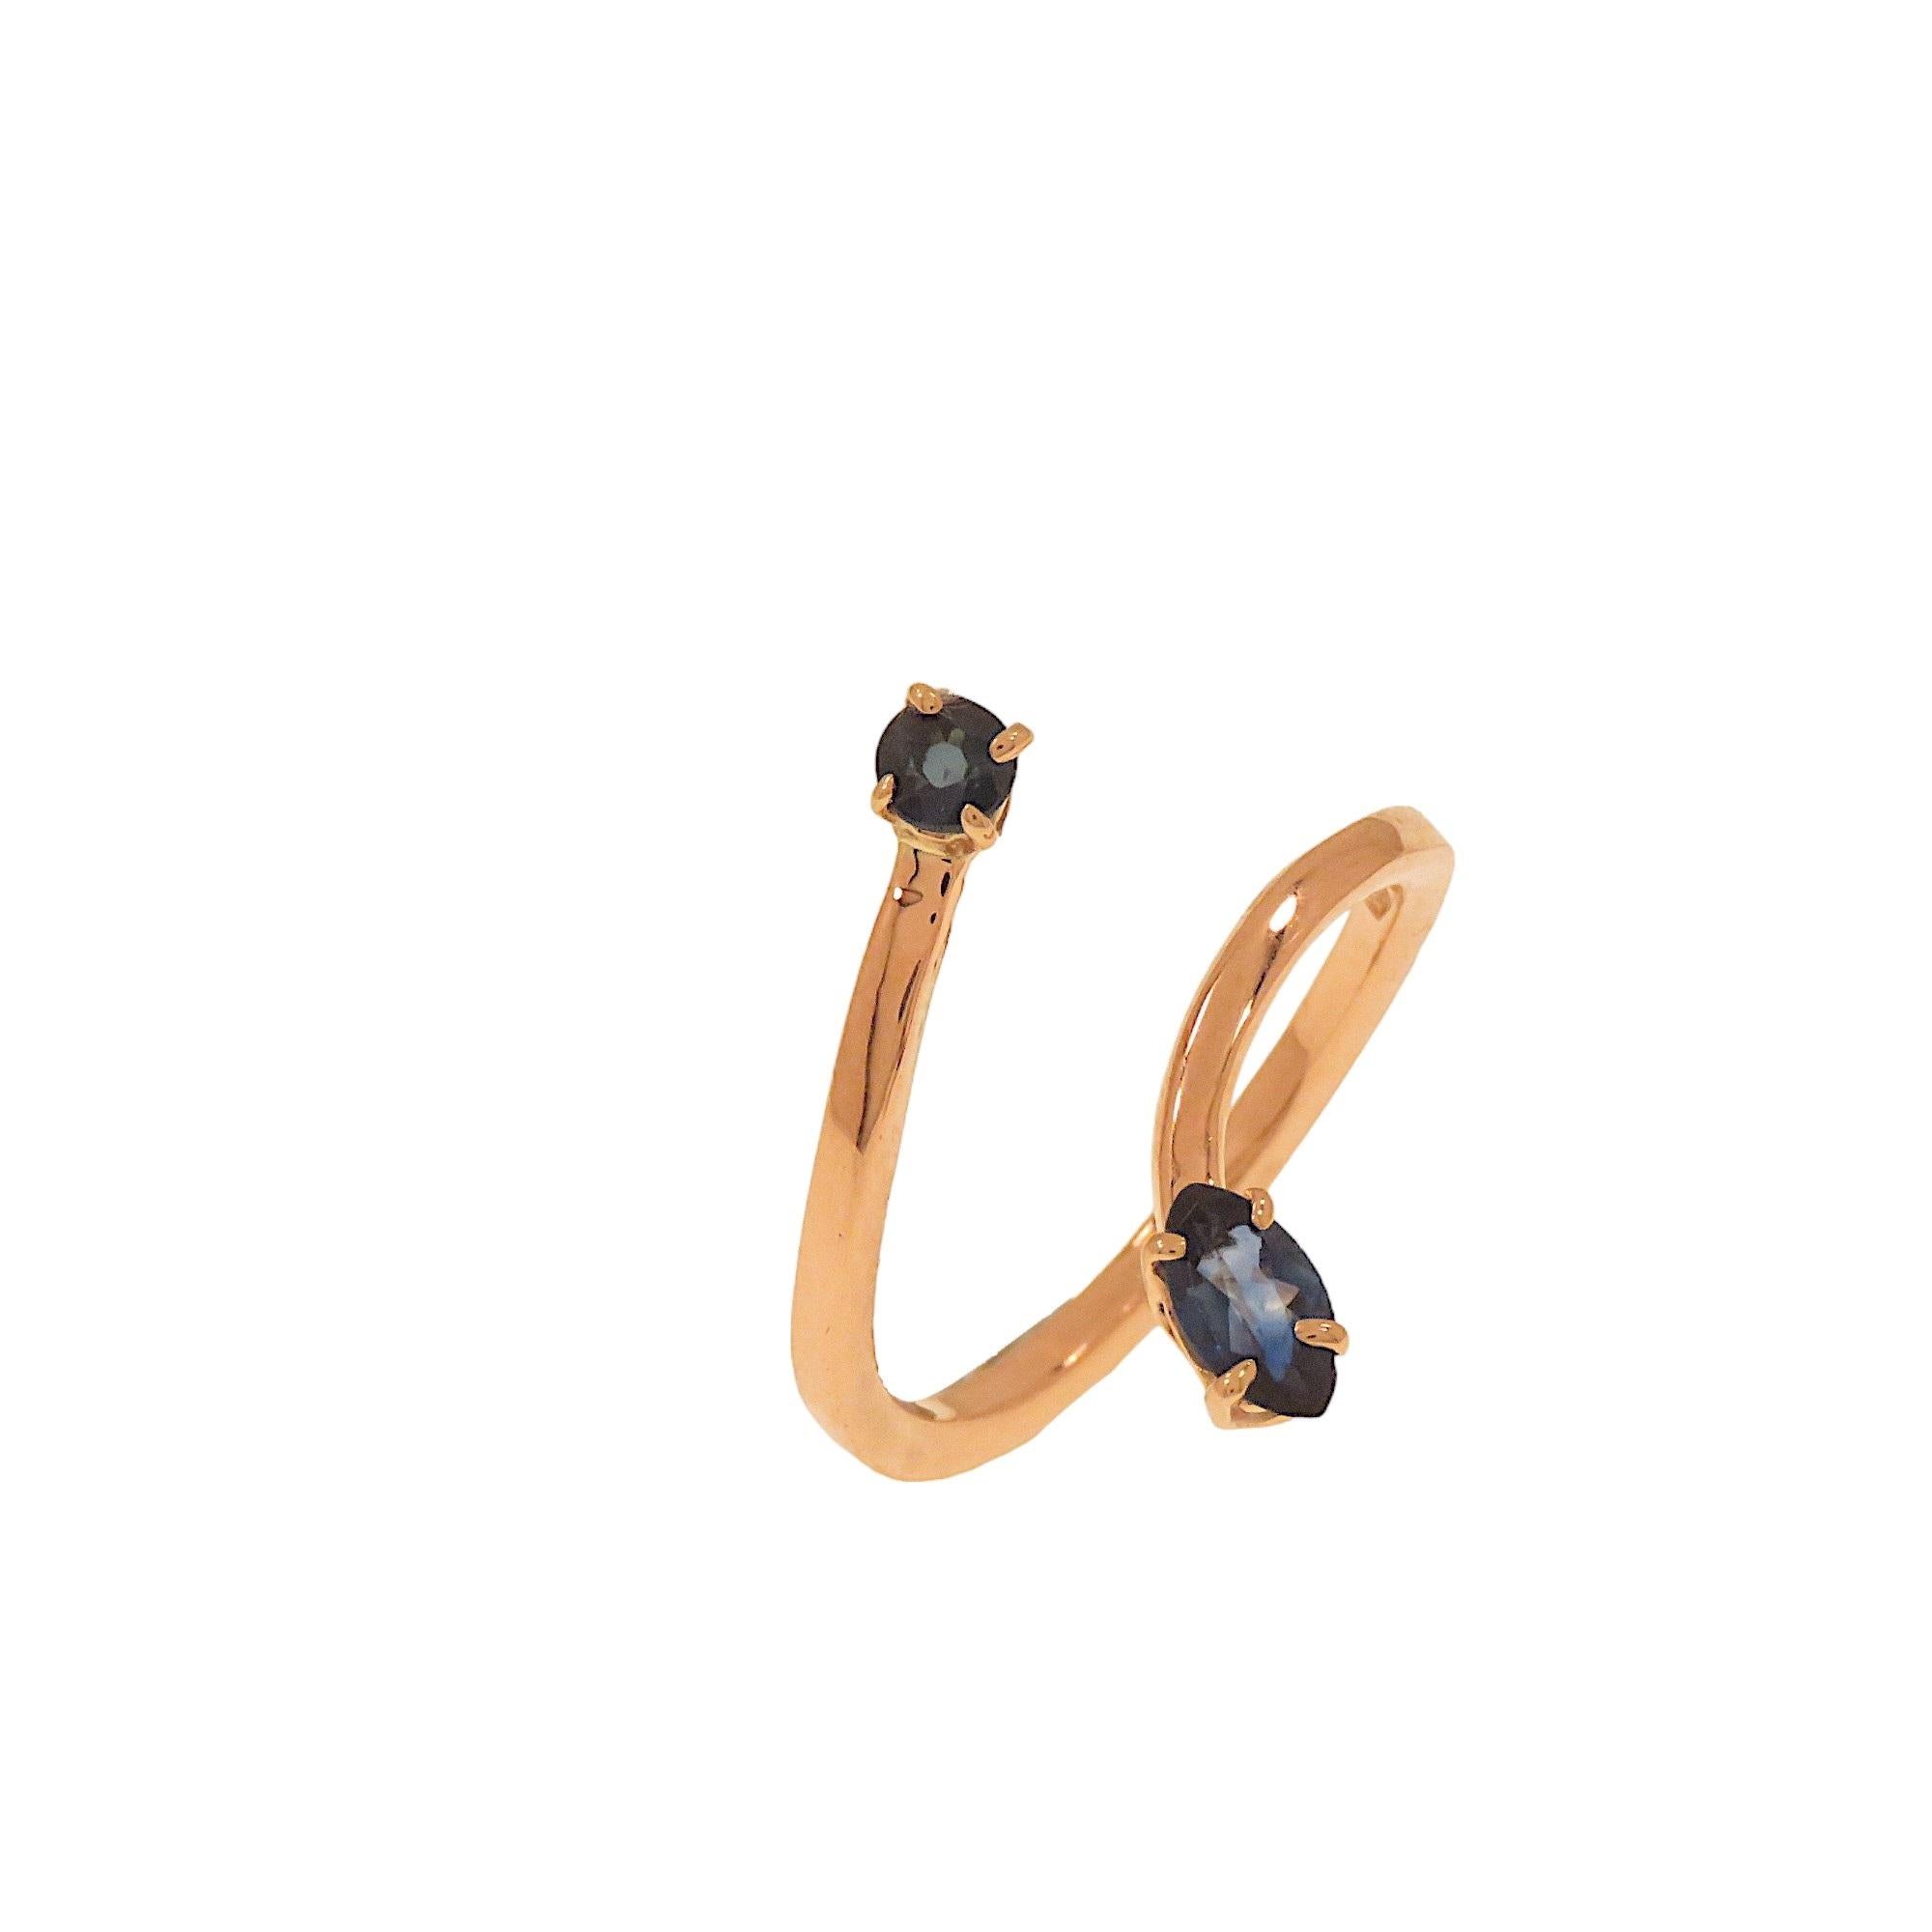 Mixed Cut Botta jewelry ring with blue sapphires in rose gold made in Italy For Sale